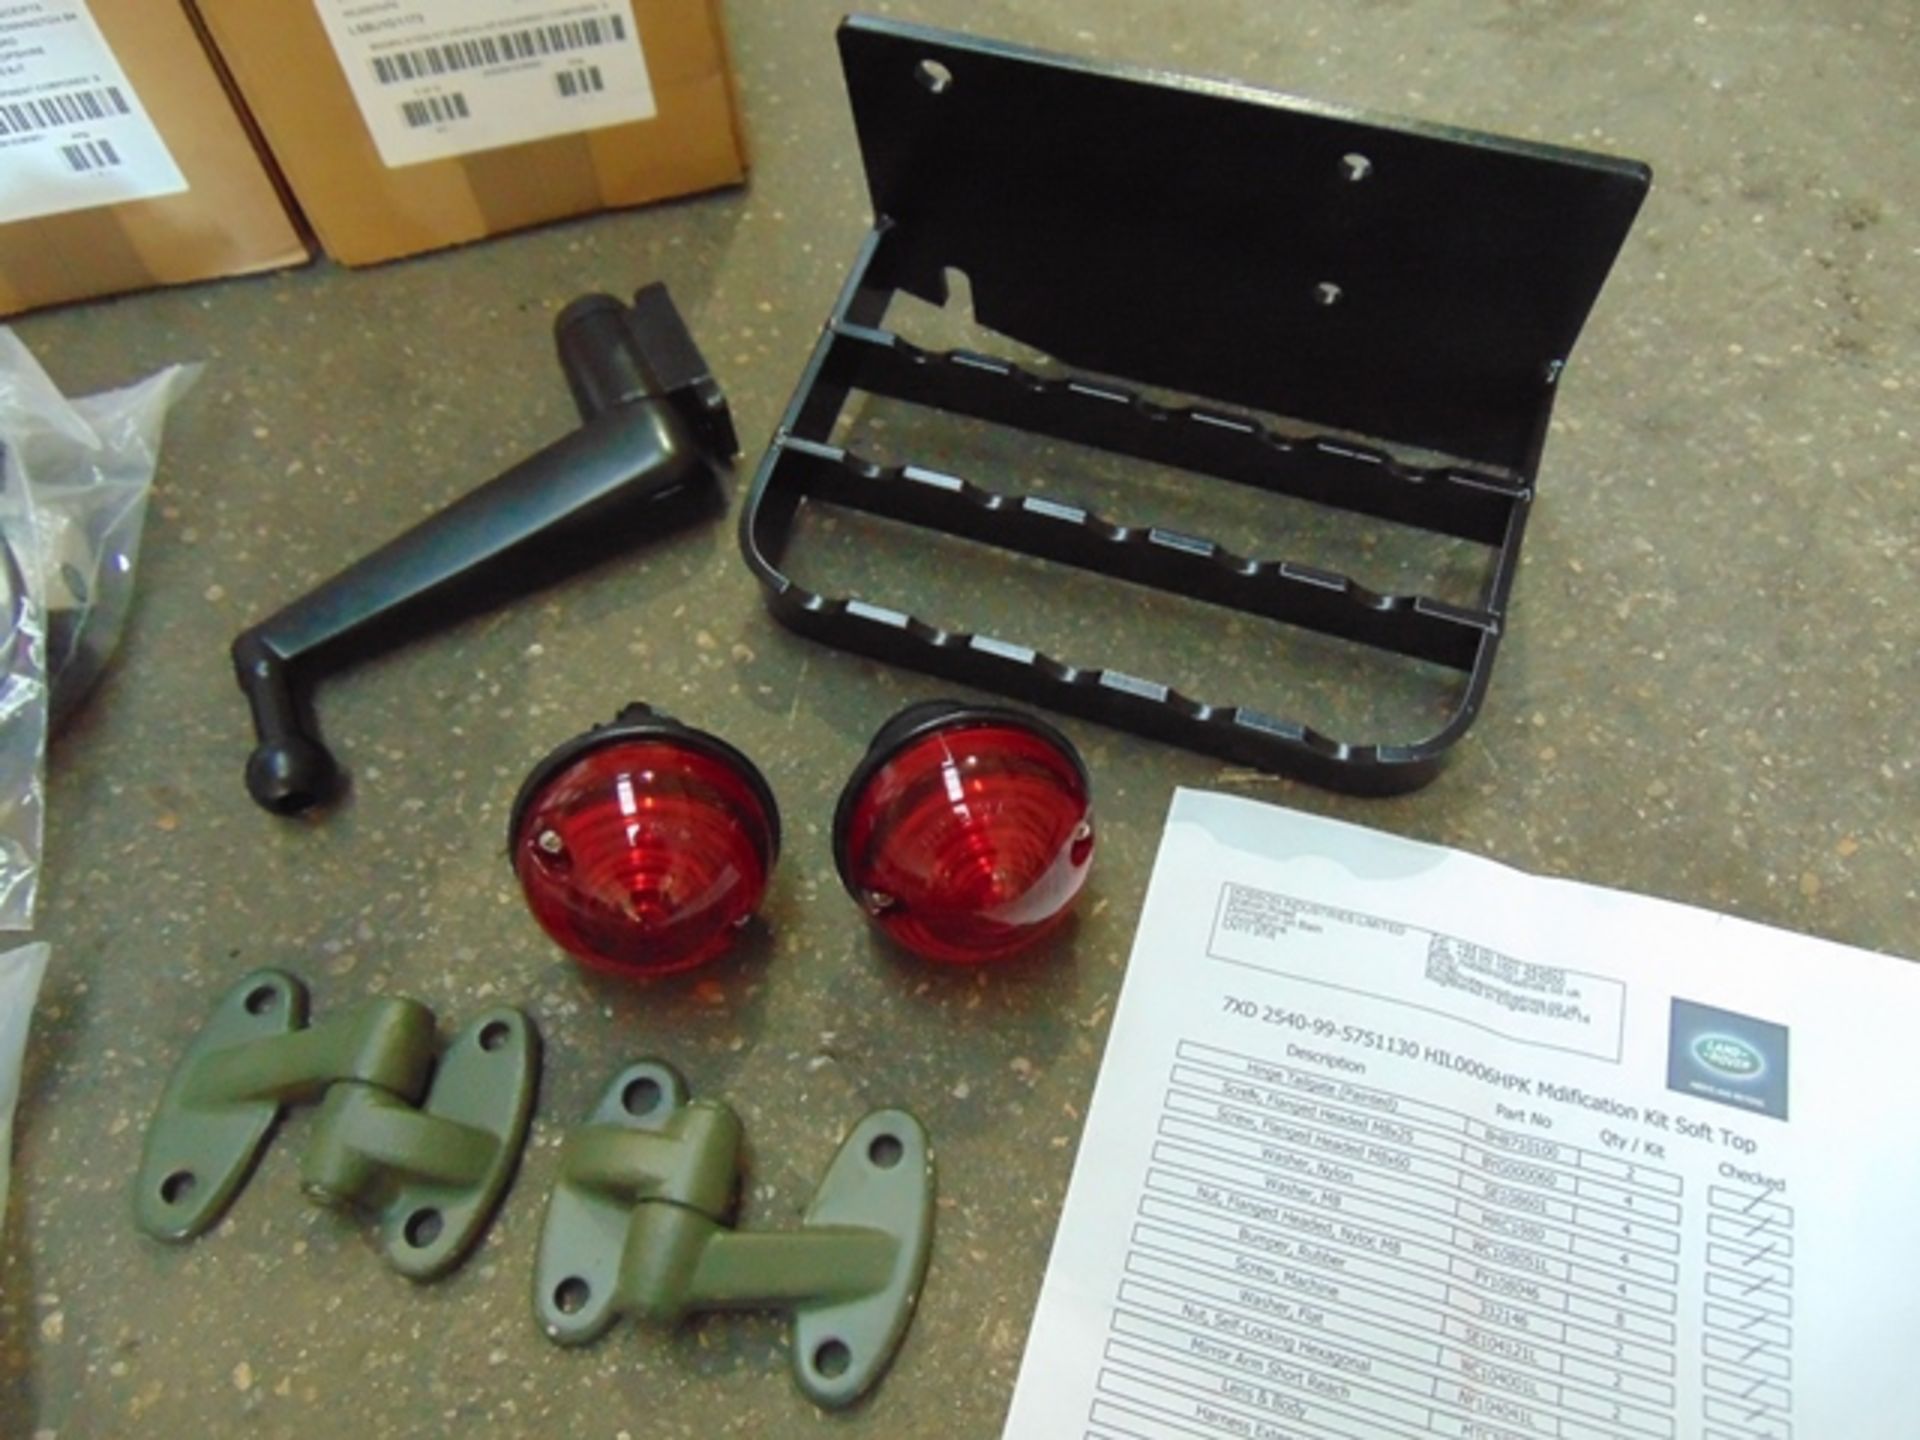 24 x Land Rover 90/110 Soft Top Modification Kits - Image 3 of 6